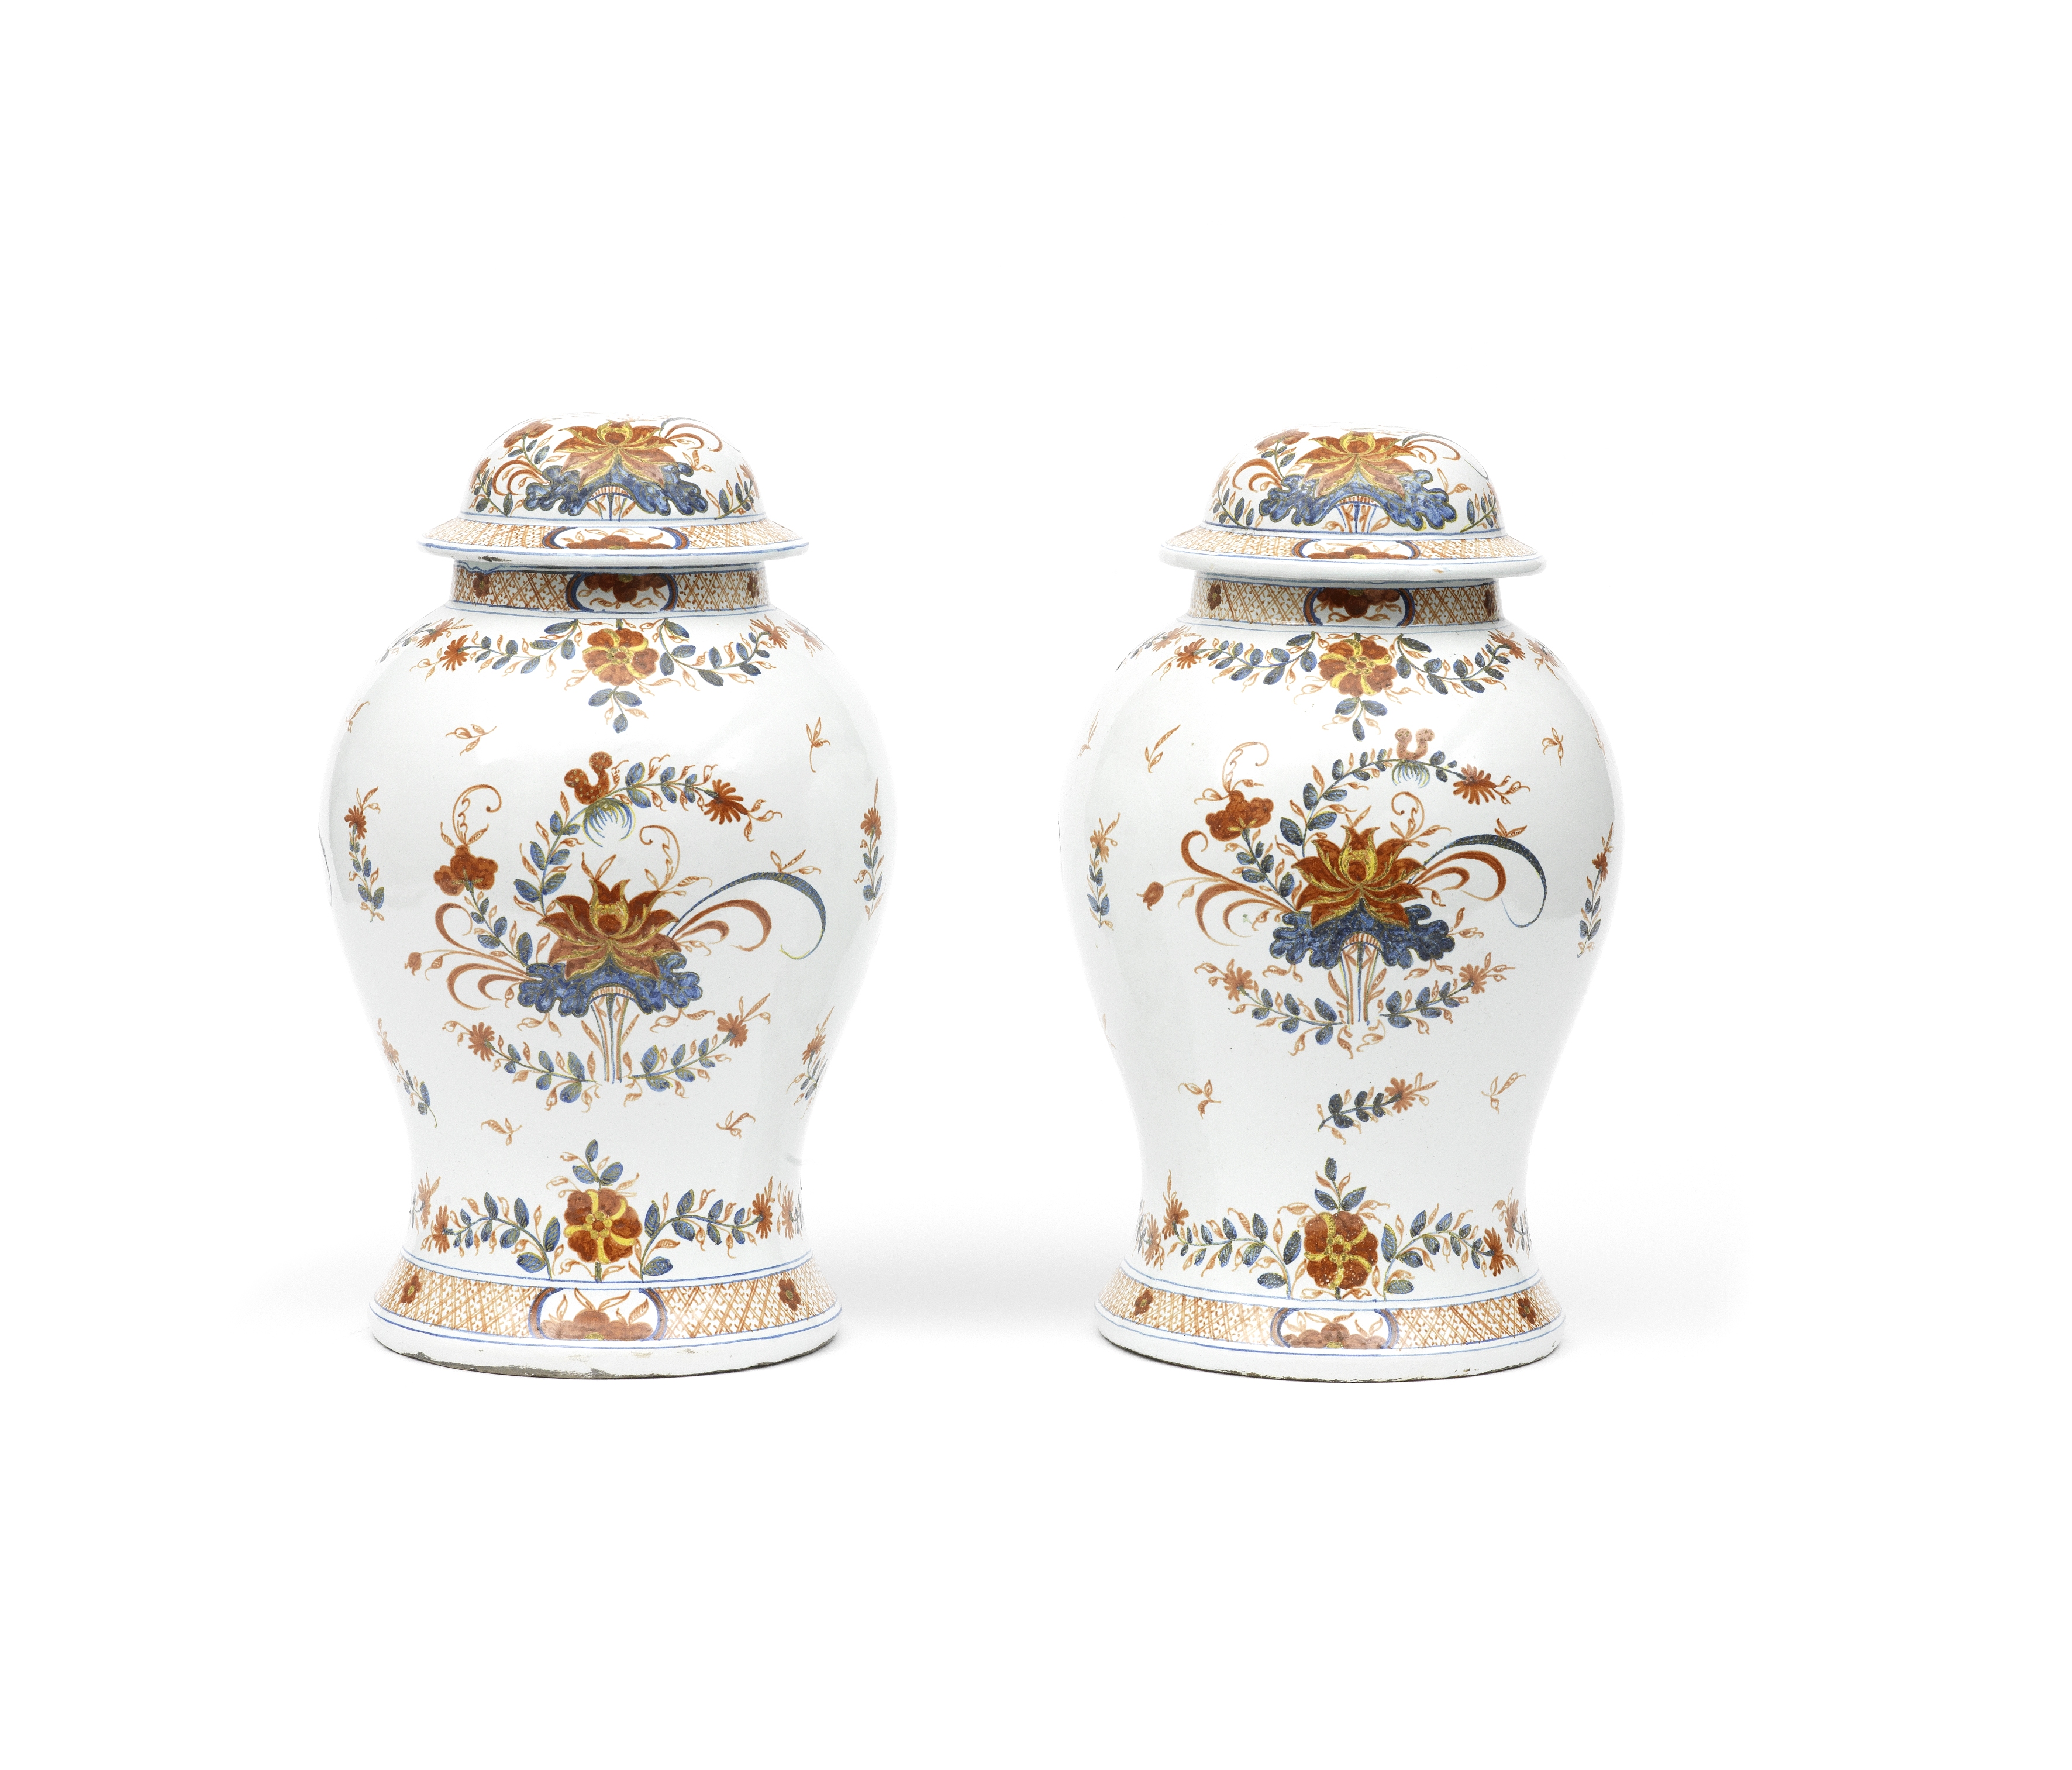 A pair of late 19th/early 20th century Italian faience vases and covers